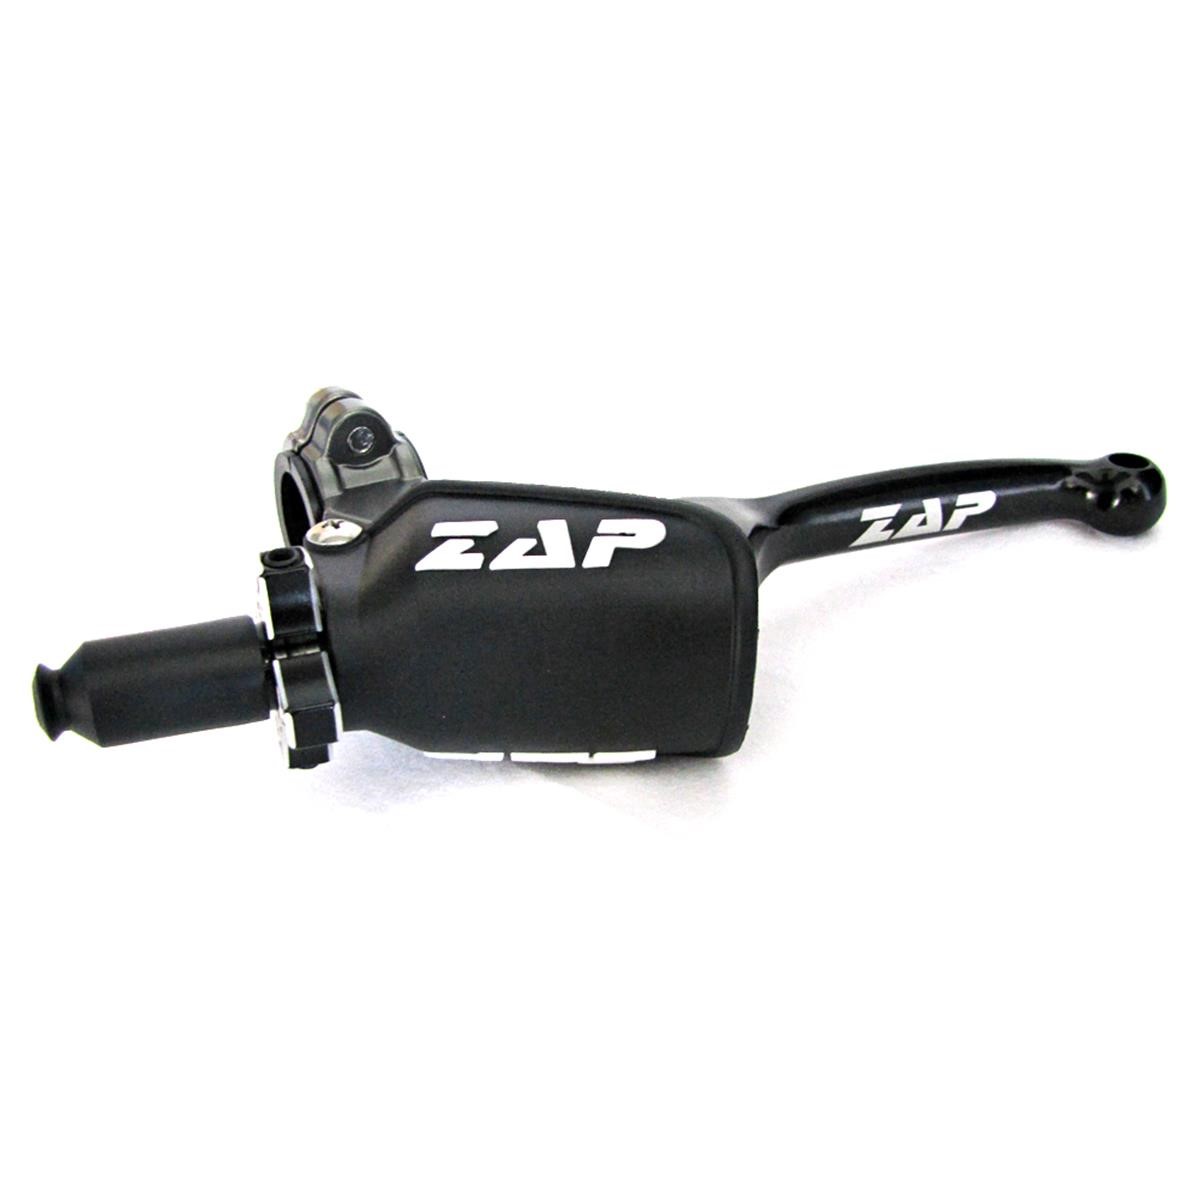 ZAP clutch perch V.2X with foldable lever, black - limited edition